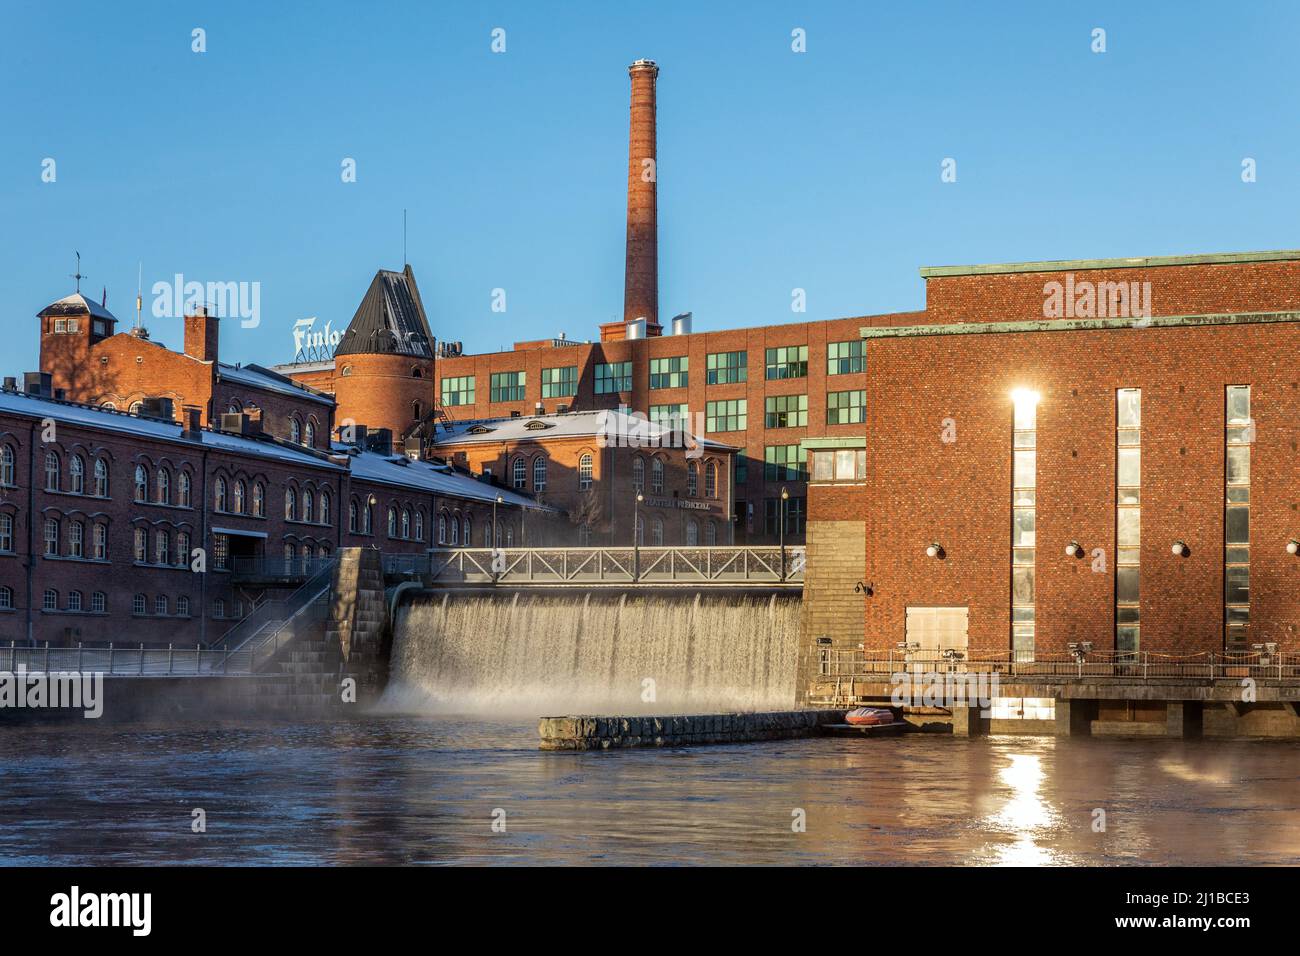 THE WALK OF LOVE LOCKS, TAMMERKOSKI FALLS WITH ITS HYDROELECTRIC PLANT AND THE FRENCKELL THEATER, TAMPERE, FINLAND, EUROPE Stock Photo